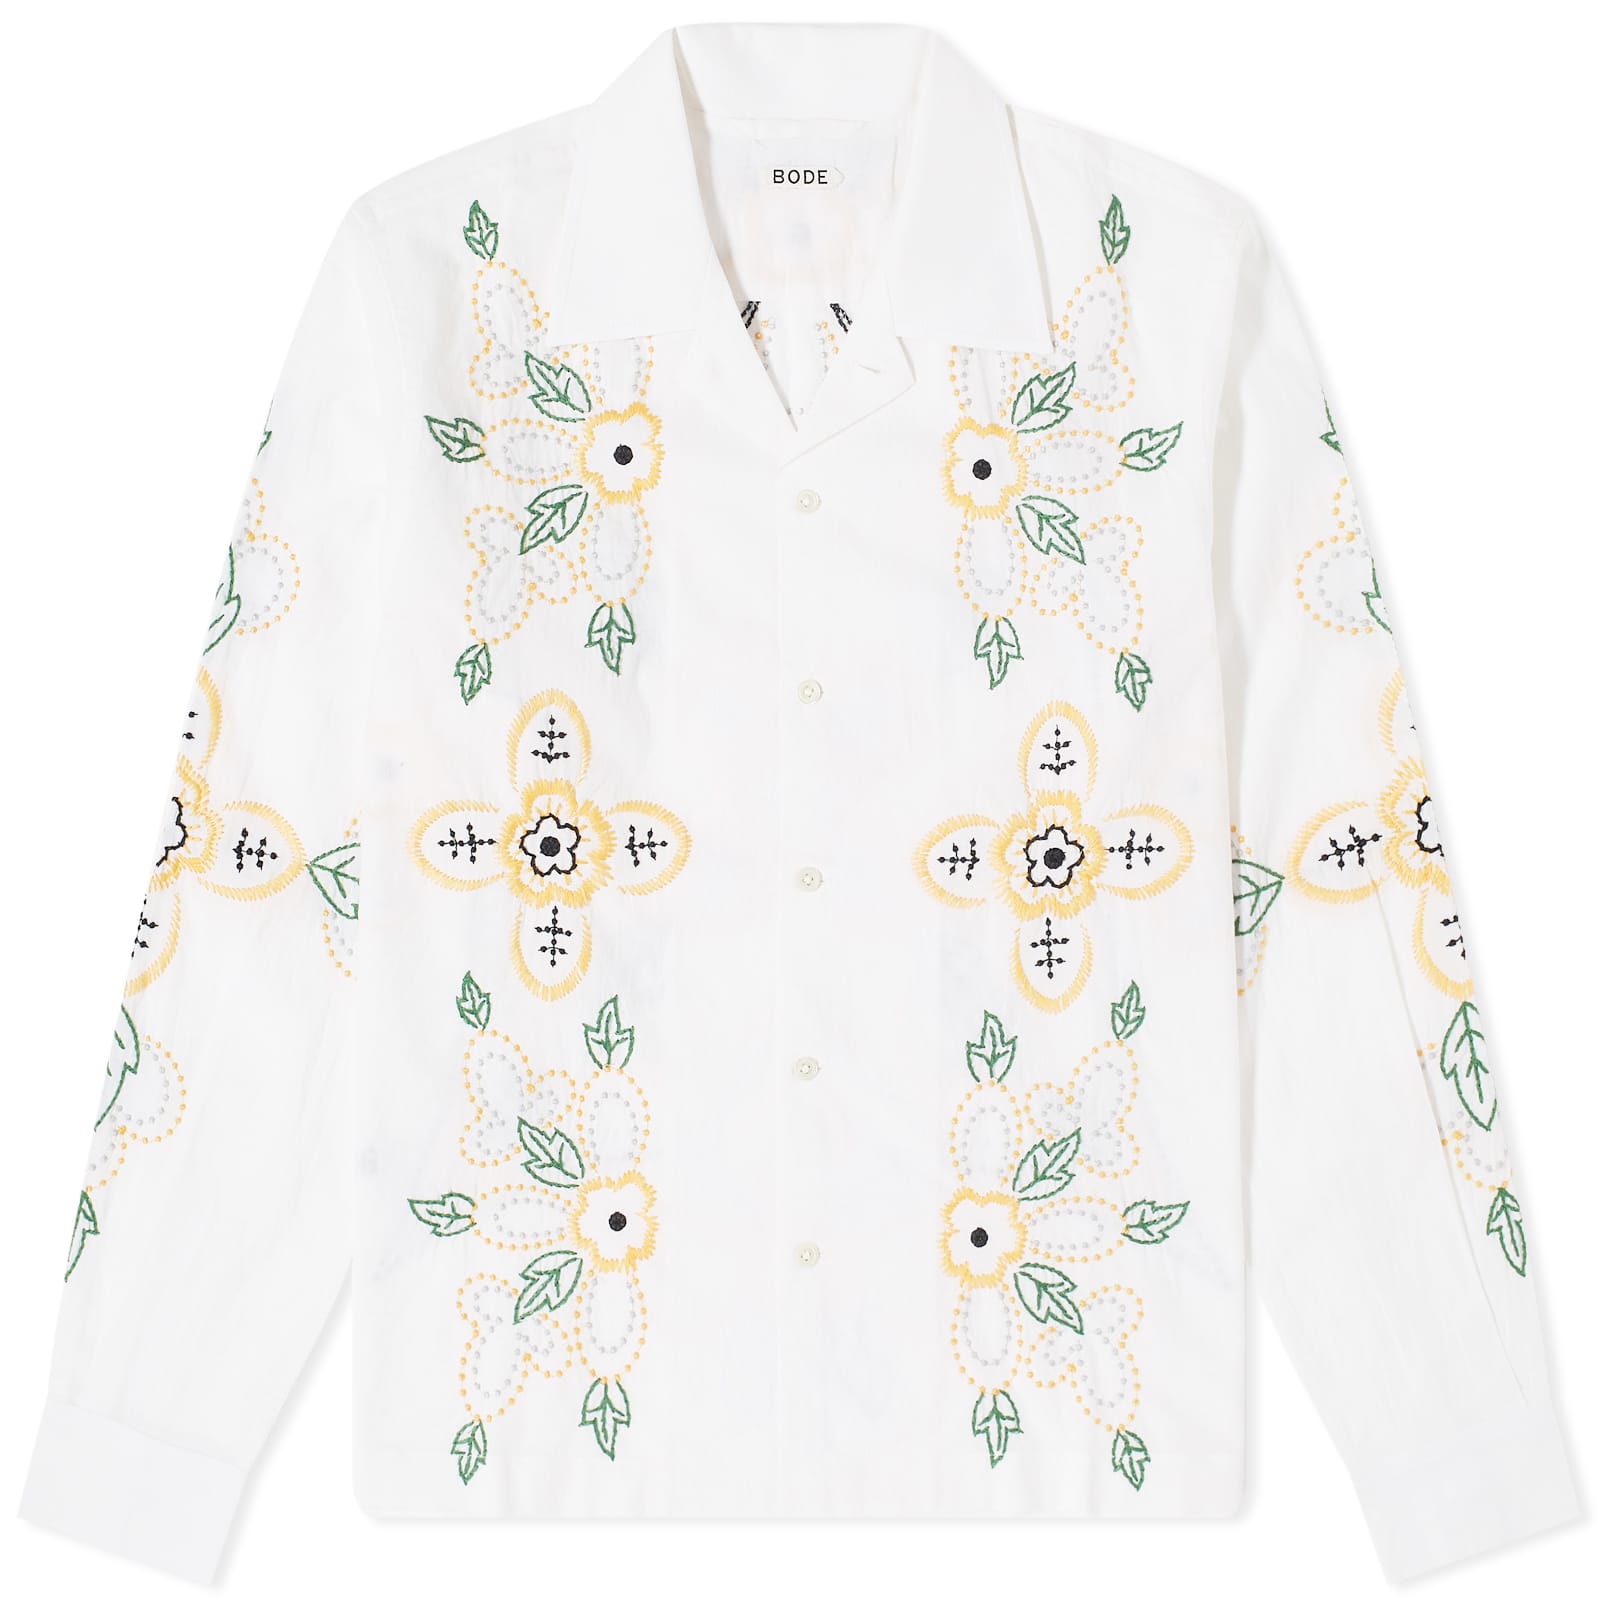 рубашка officine generale eren bubble print vacation shirt Рубашка Bode Embroidered Buttercup, белый